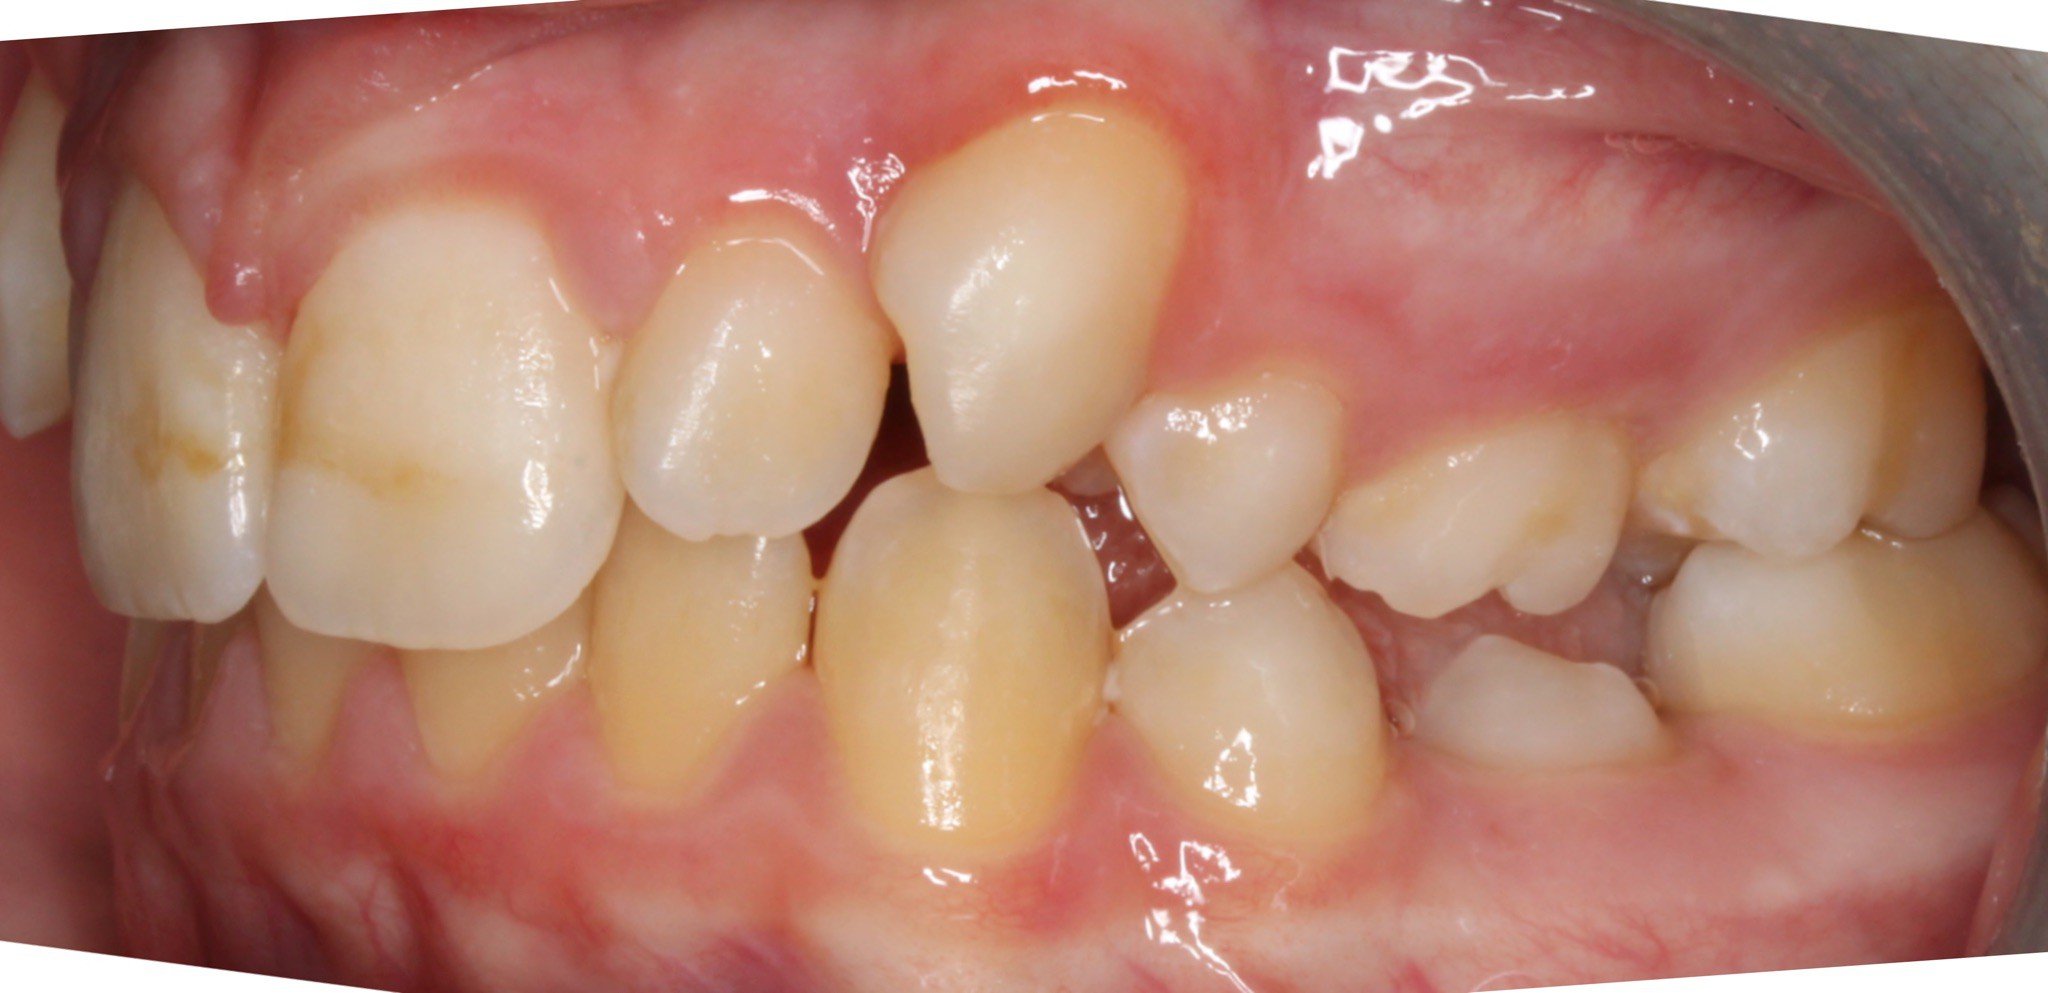 Before photo (right side view of teeth): Dental Expanders & Braces for Severe Crowding, Case Study #1